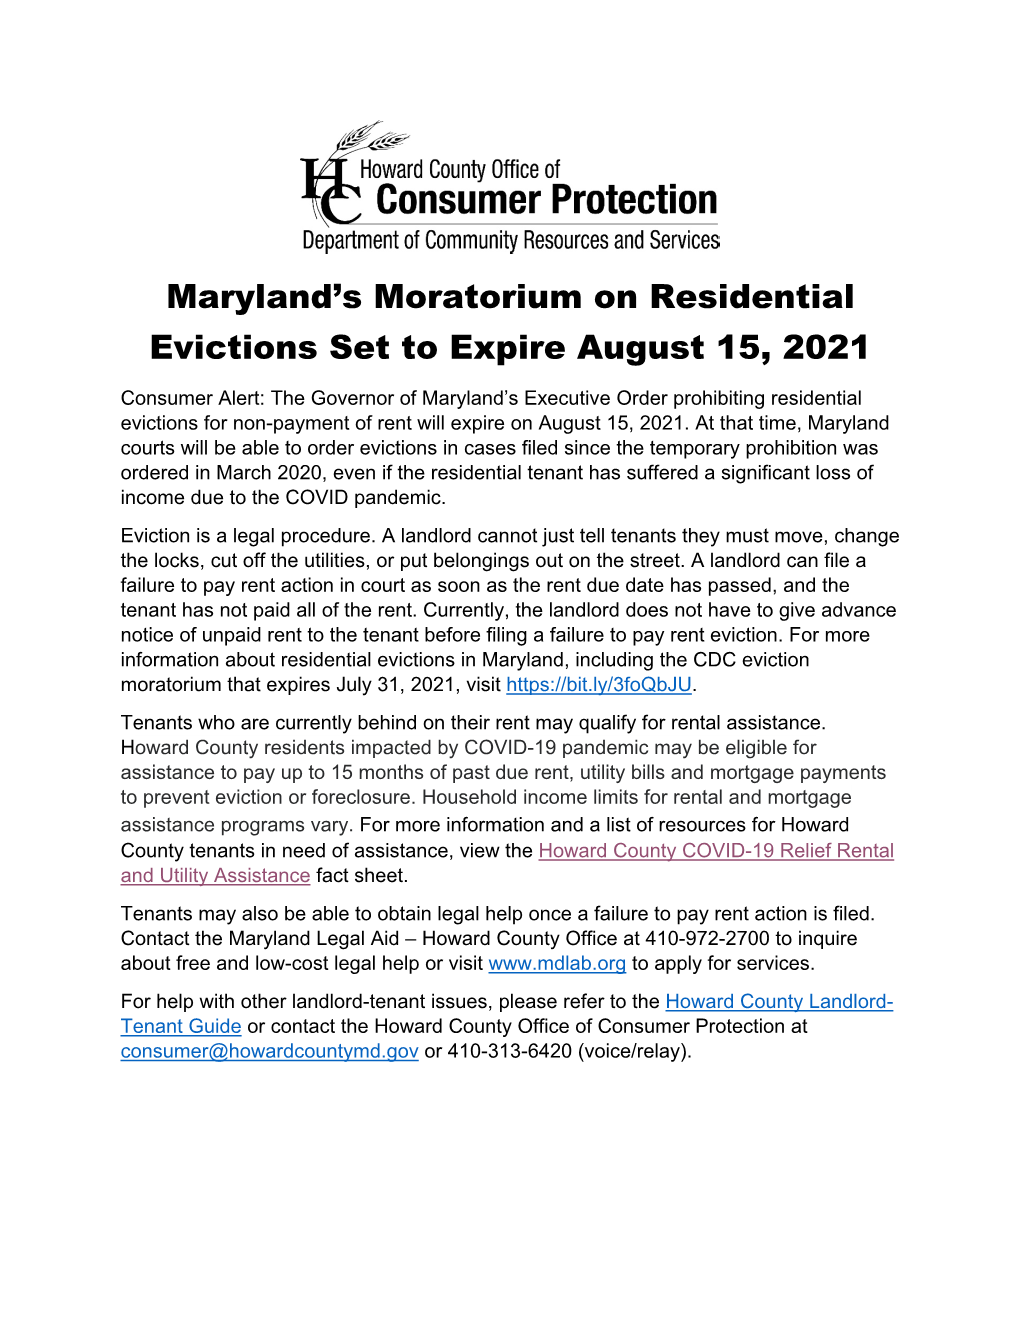 Maryland's Moratorium on Residential Evictions Set to Expire August 15